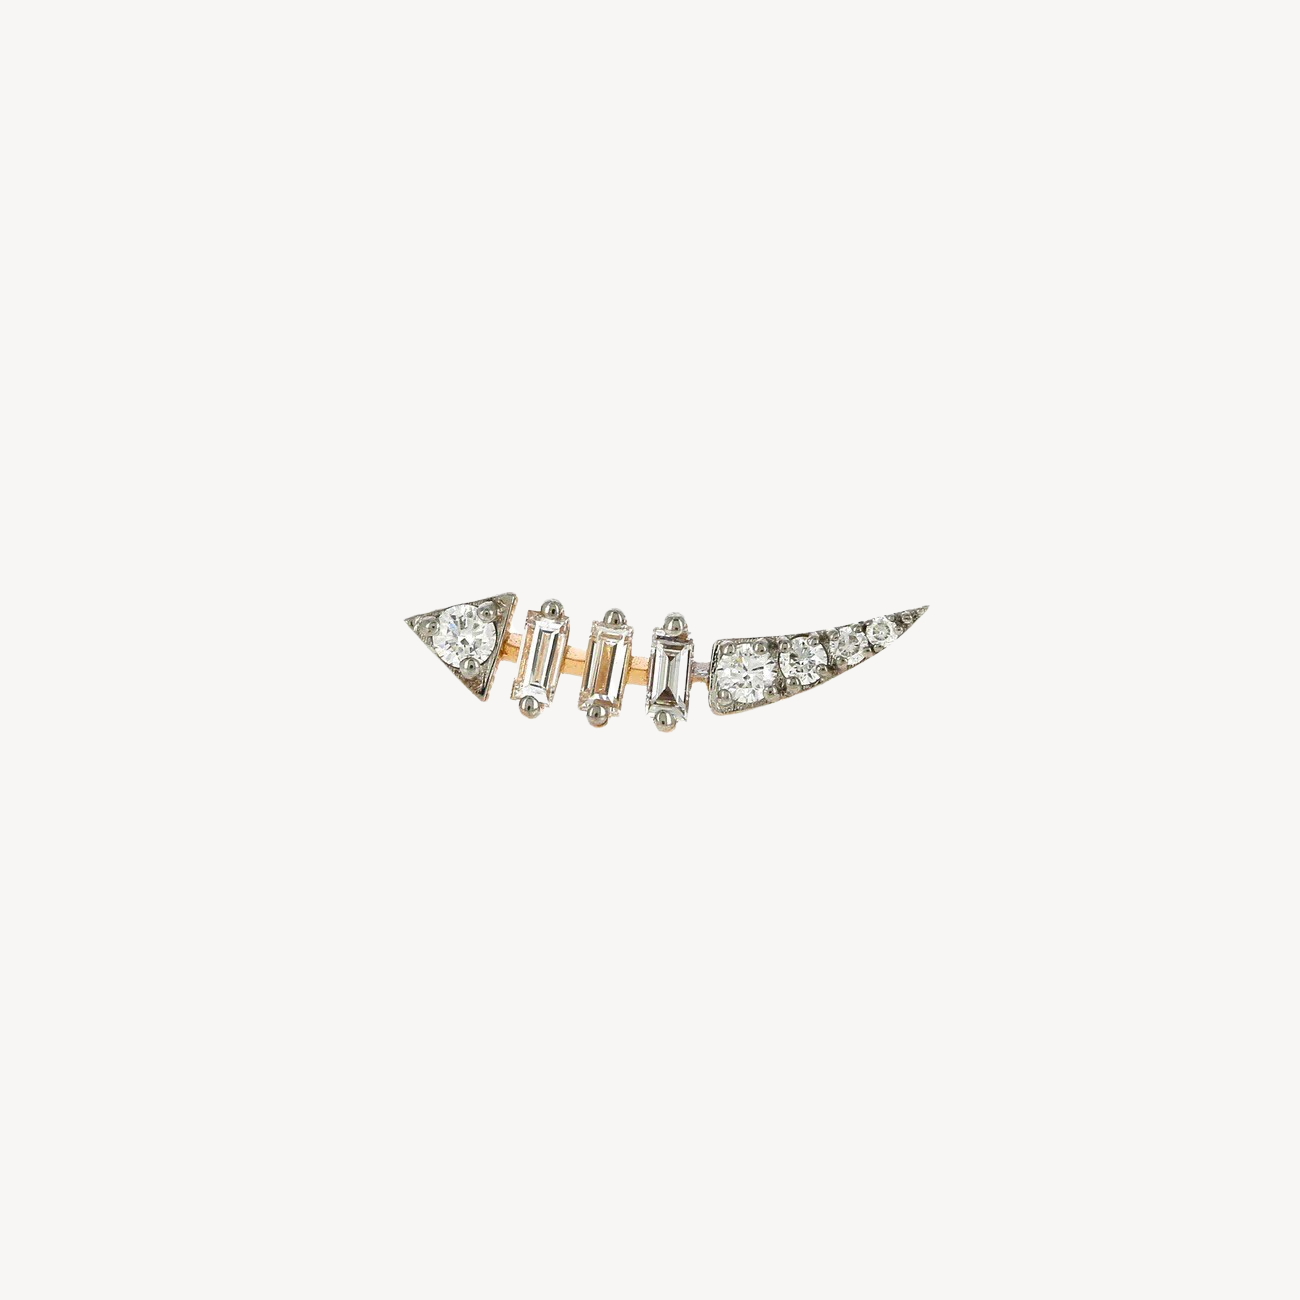 In Deep Baguette and White Diamond Stud